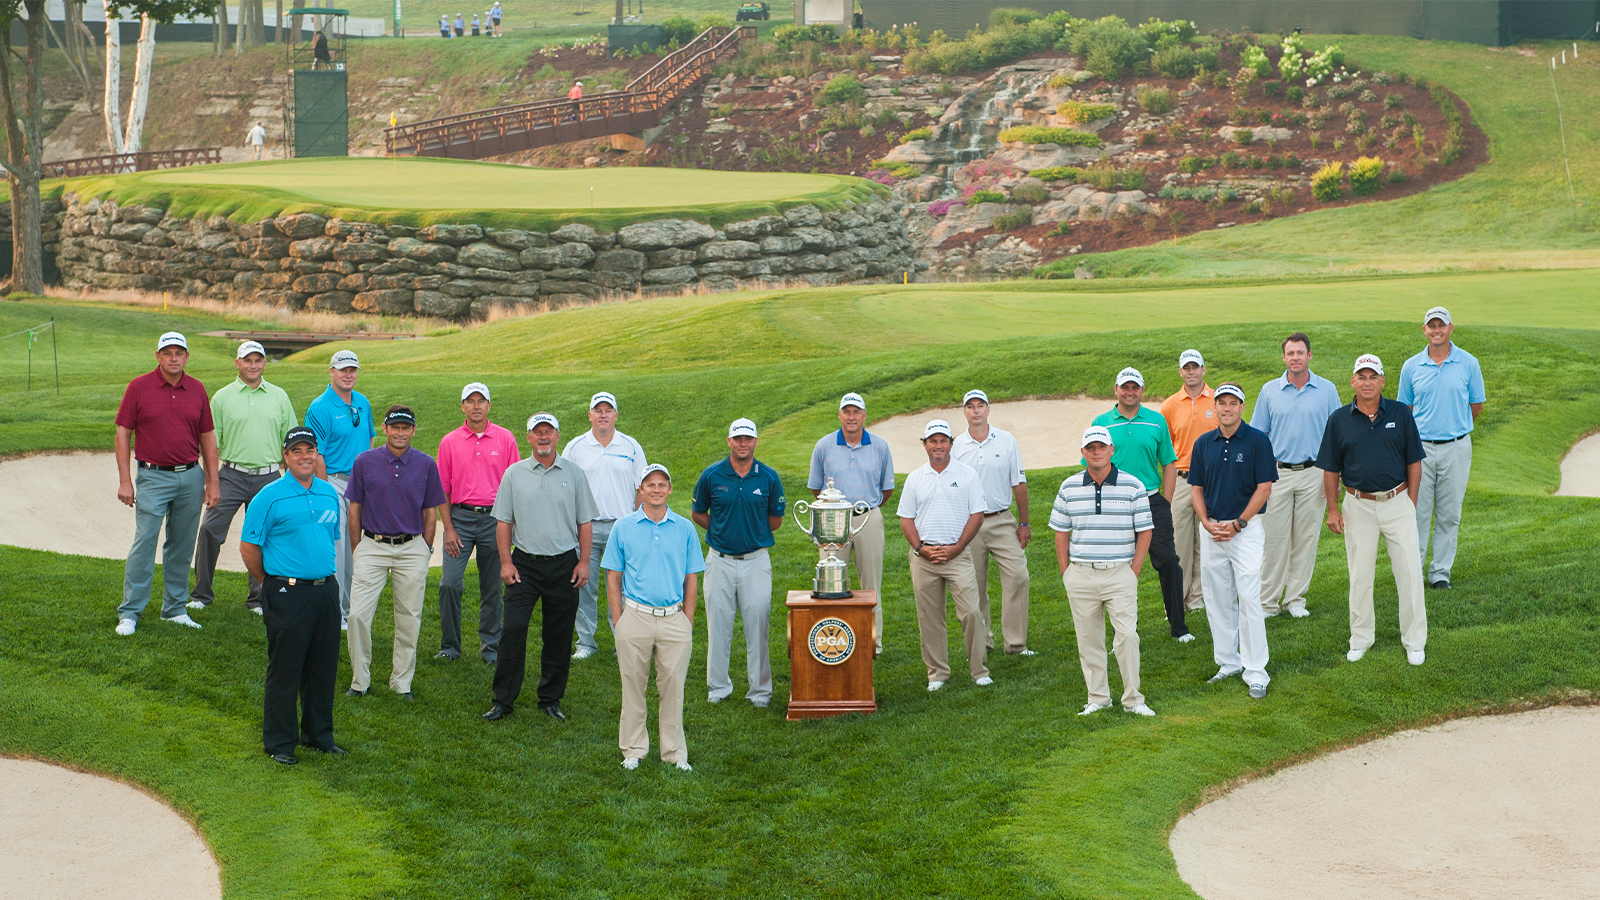 The 20 PGA Club Professionals competing in the PGA Championship pose for a photo (L-R): Rod Perry, Dustin Volk, David Hronek, Ryan Helminen, Steve Schneiter, Jerry Smith, Jim McGovern, Bob Sowards, Matt Pesta, Michael Block, David Tentis, Stuart Deane, Dave McNabb, Brian Norman, Johan Kok, Aaron Krueger, Eric Williamson, Rob Corcoran, Frank Esposito, Jamie Broce during Practice Rounds at the 96th PGA Championship, at Valhalla Golf Club, on August 5, 2014 in Louisville, KY. (Photo by Montana Pritchard/The PGA of America)